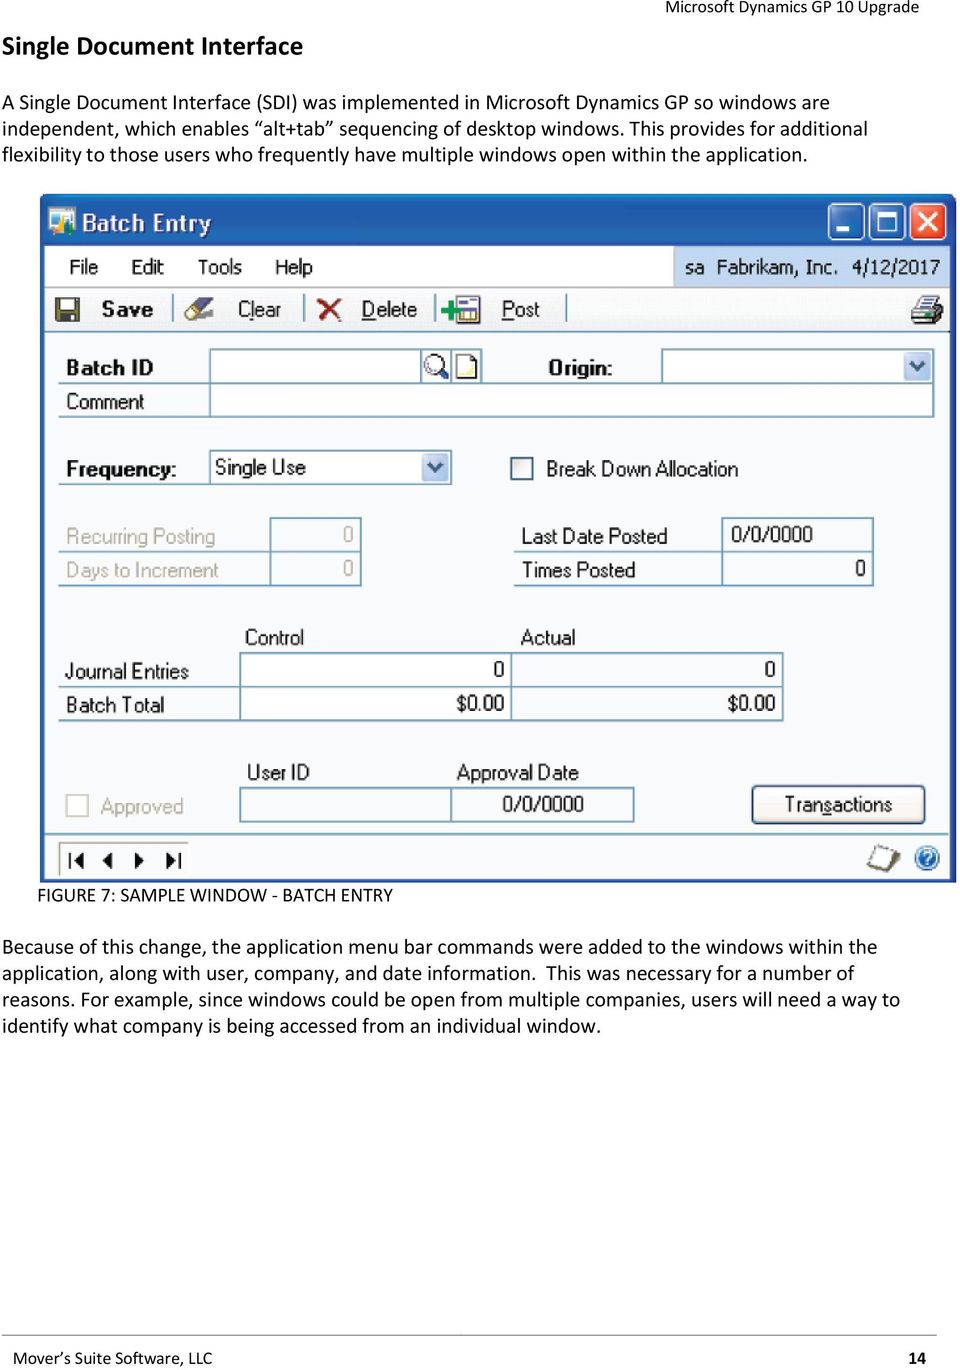 FIGURE 7: SAMPLE WINDOW - BATCH ENTRY Because of this change, the application menu bar commands were added to the windows within the application, along with user, company, and date